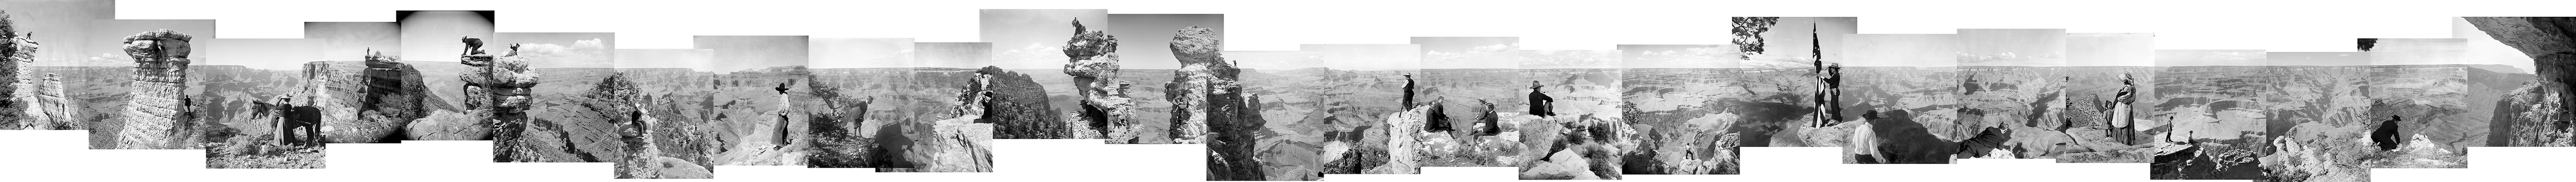 Mark Klett Black and White Photograph - People on the Edge